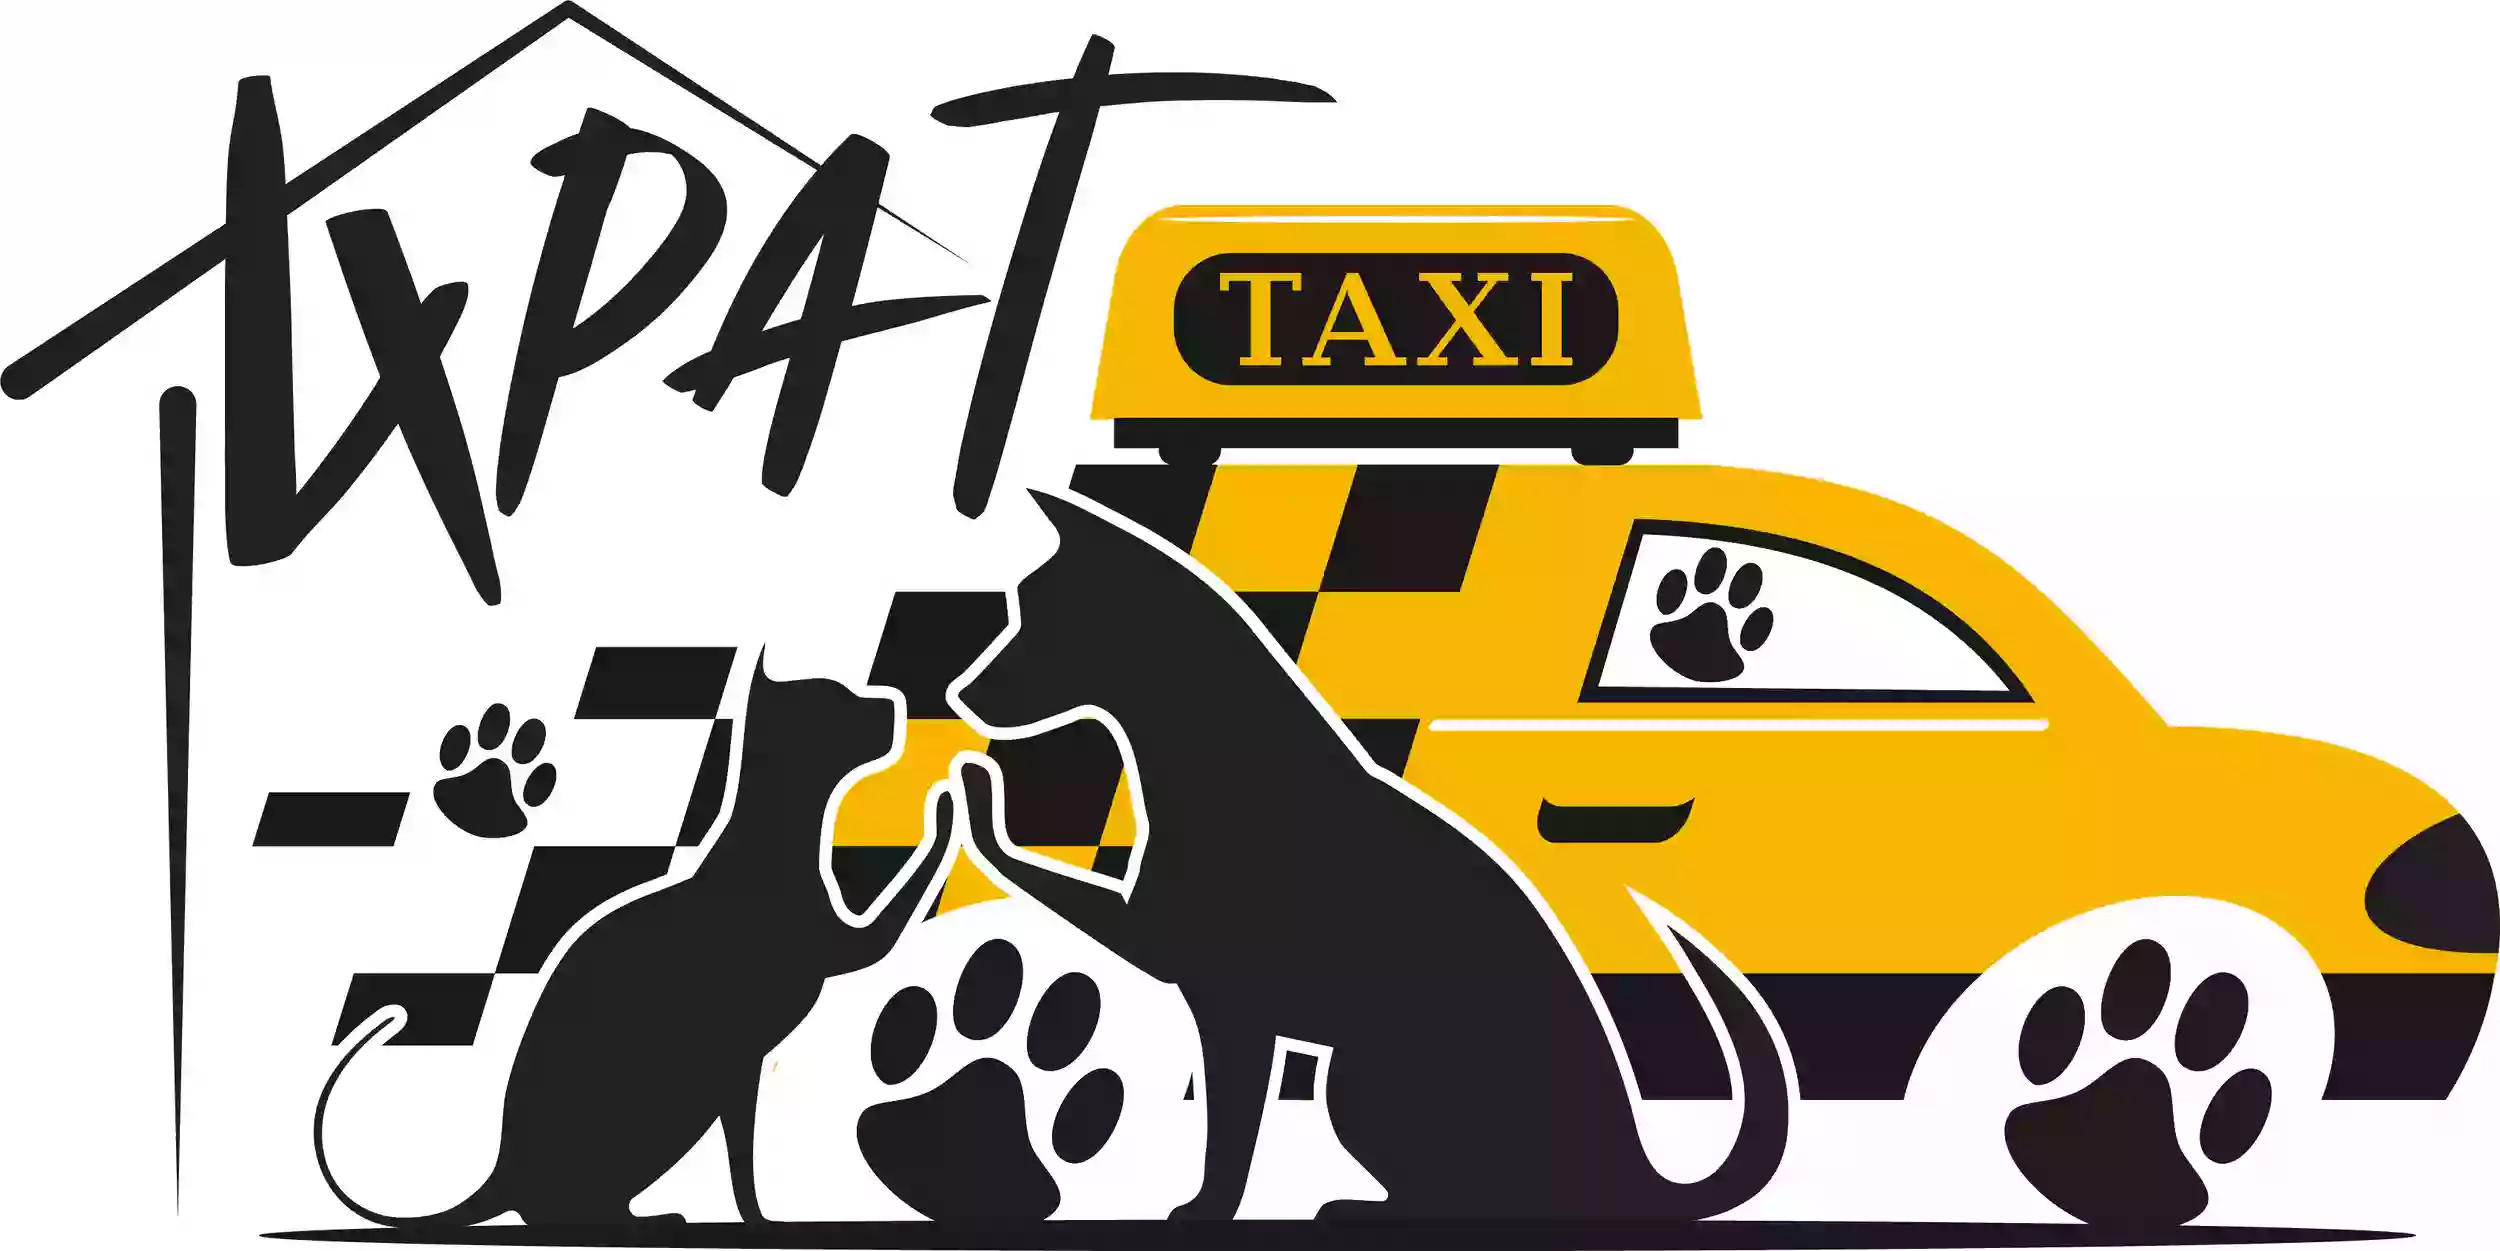 4PAT' Taxi Animalier chiens et chats